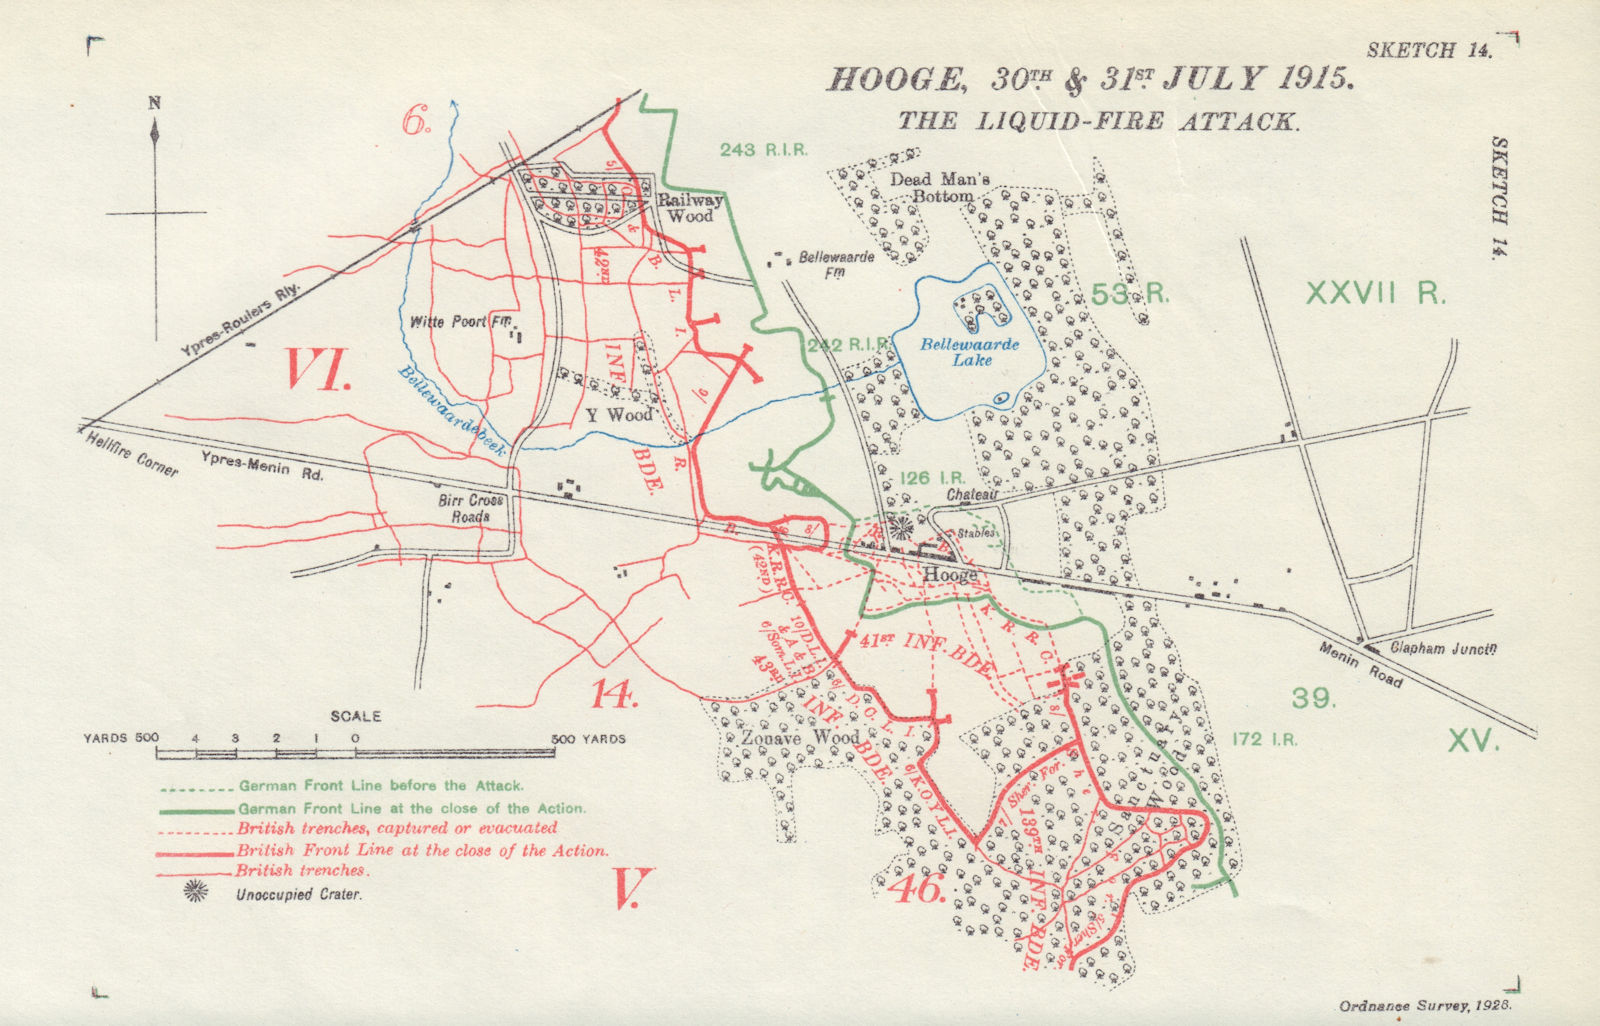 Battle of Hooge, 30-31st July 1915. Liquid-Fire Attack. Ypres. Trenches 1928 map